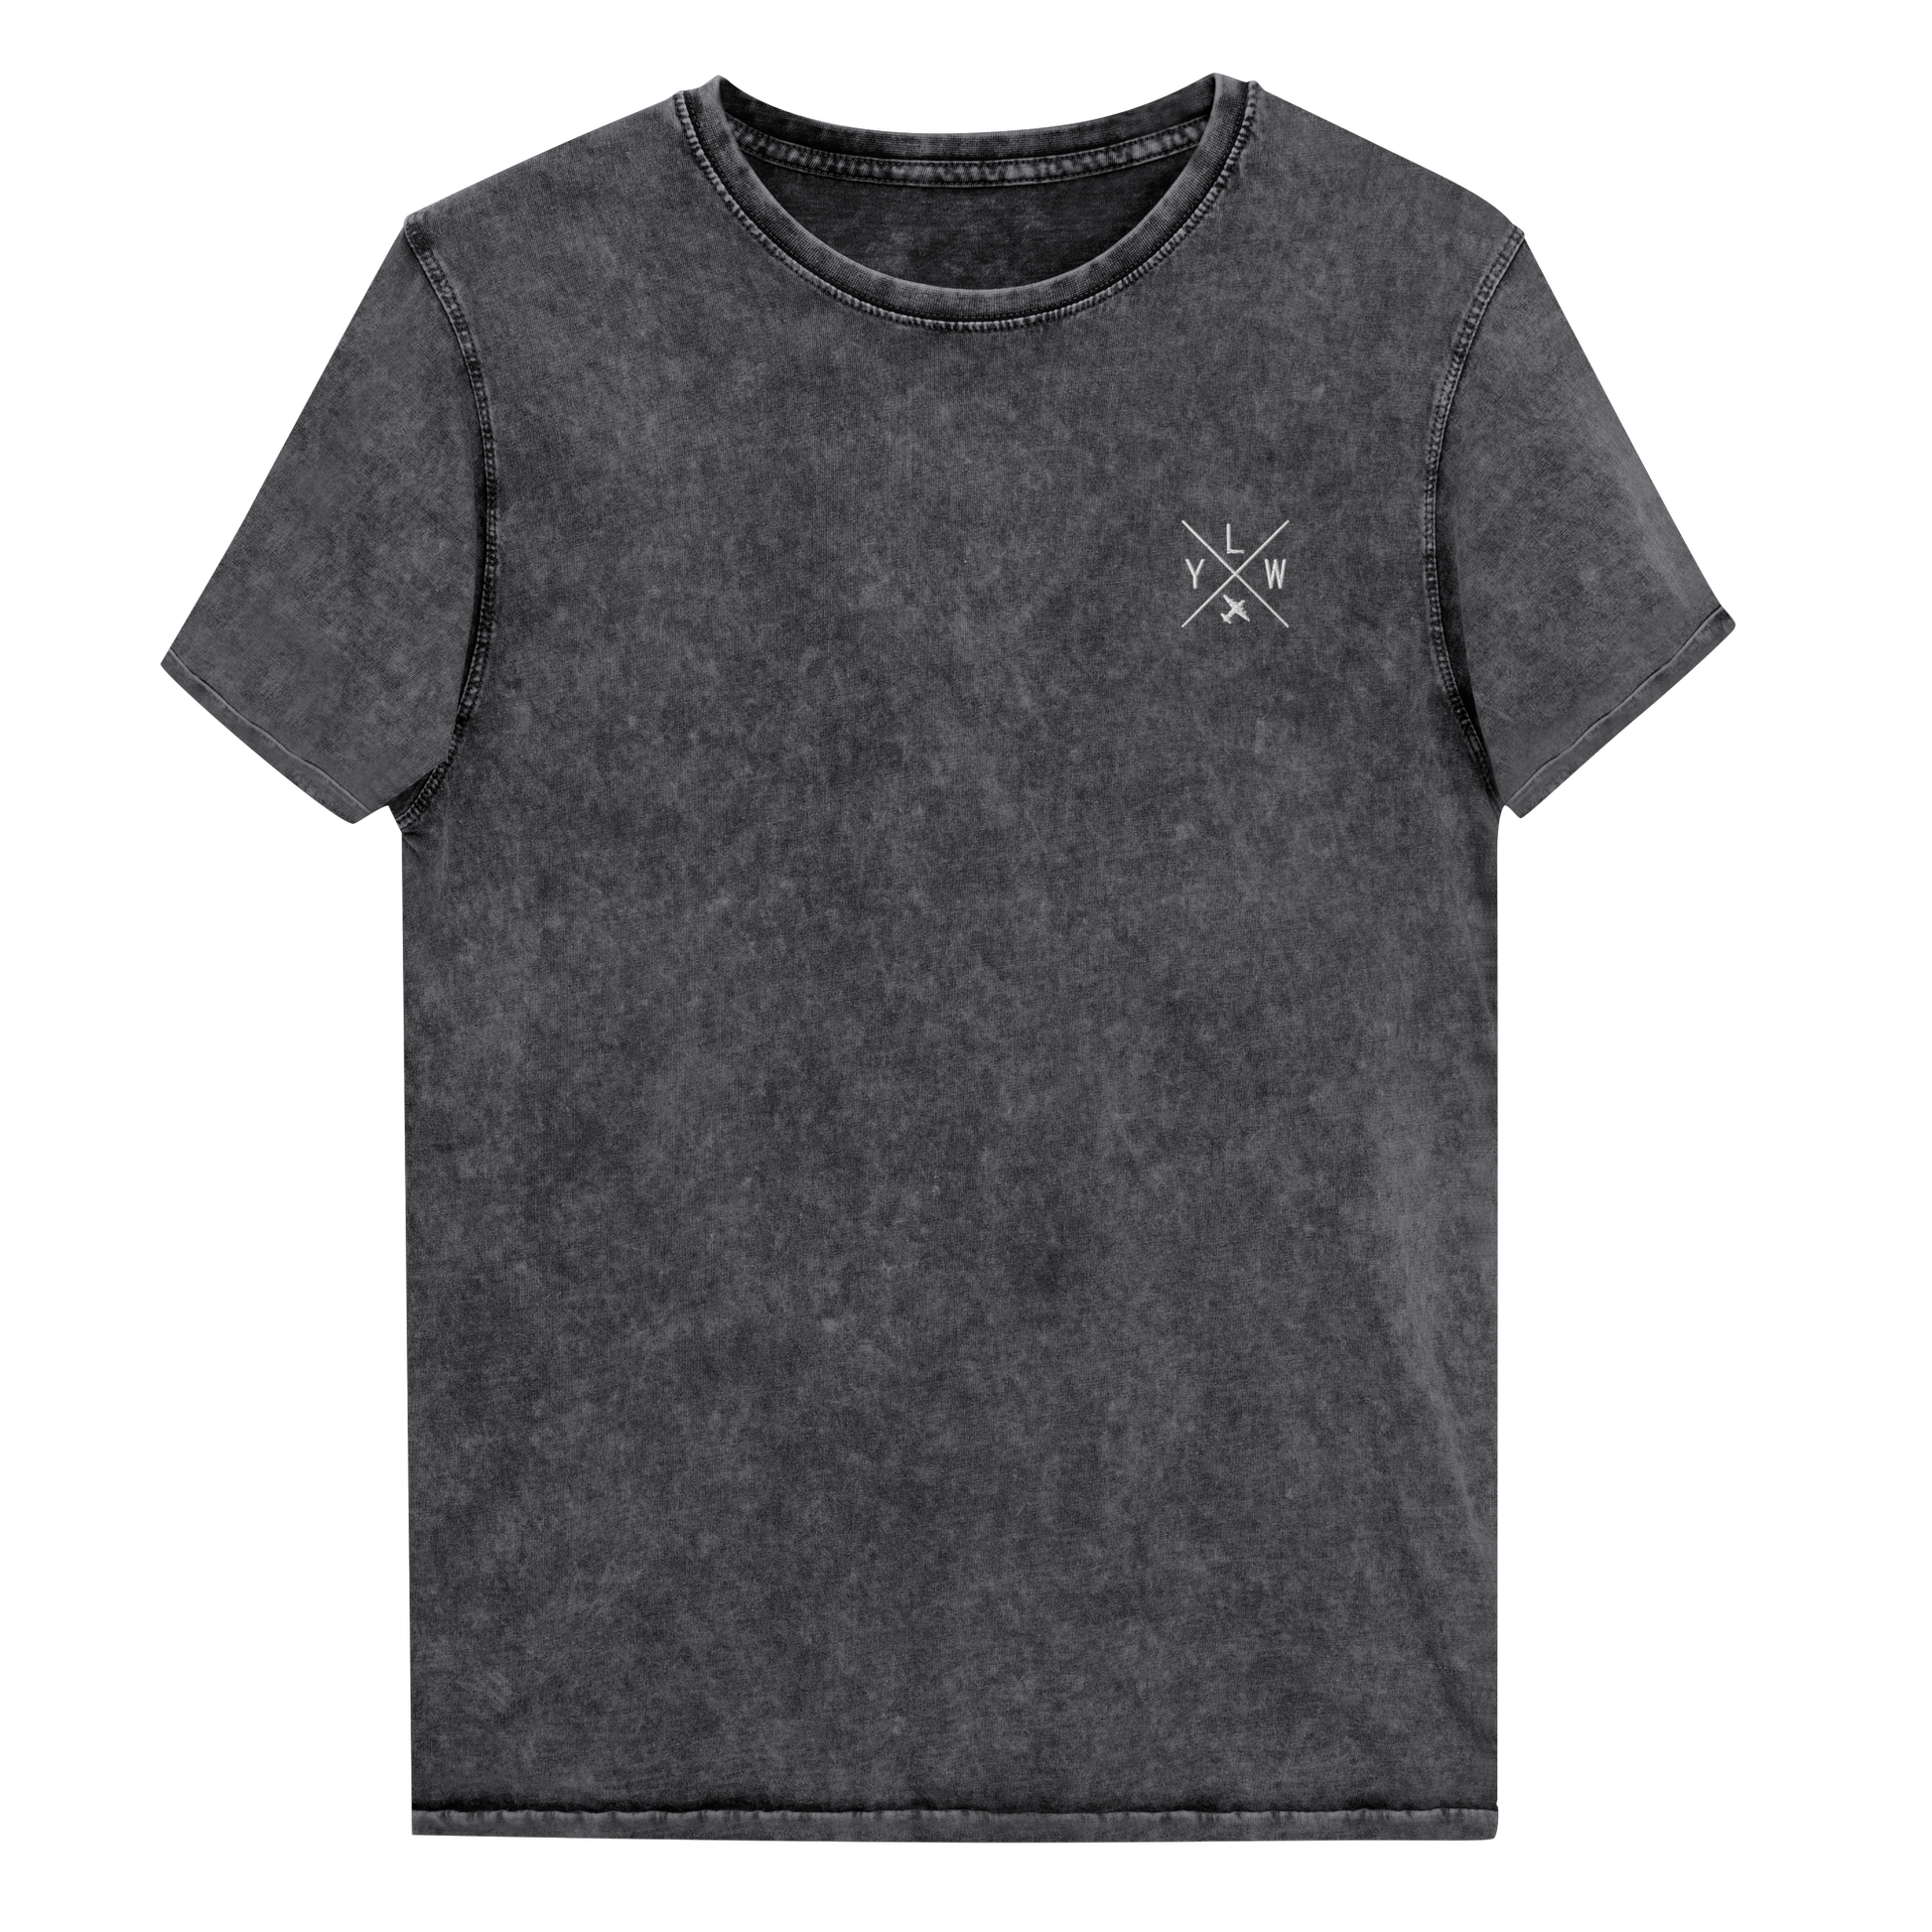 YHM Designs - YLW Kelowna Denim T-Shirt - Crossed-X Design with Airport Code and Vintage Propliner - White Embroidery - Image 02